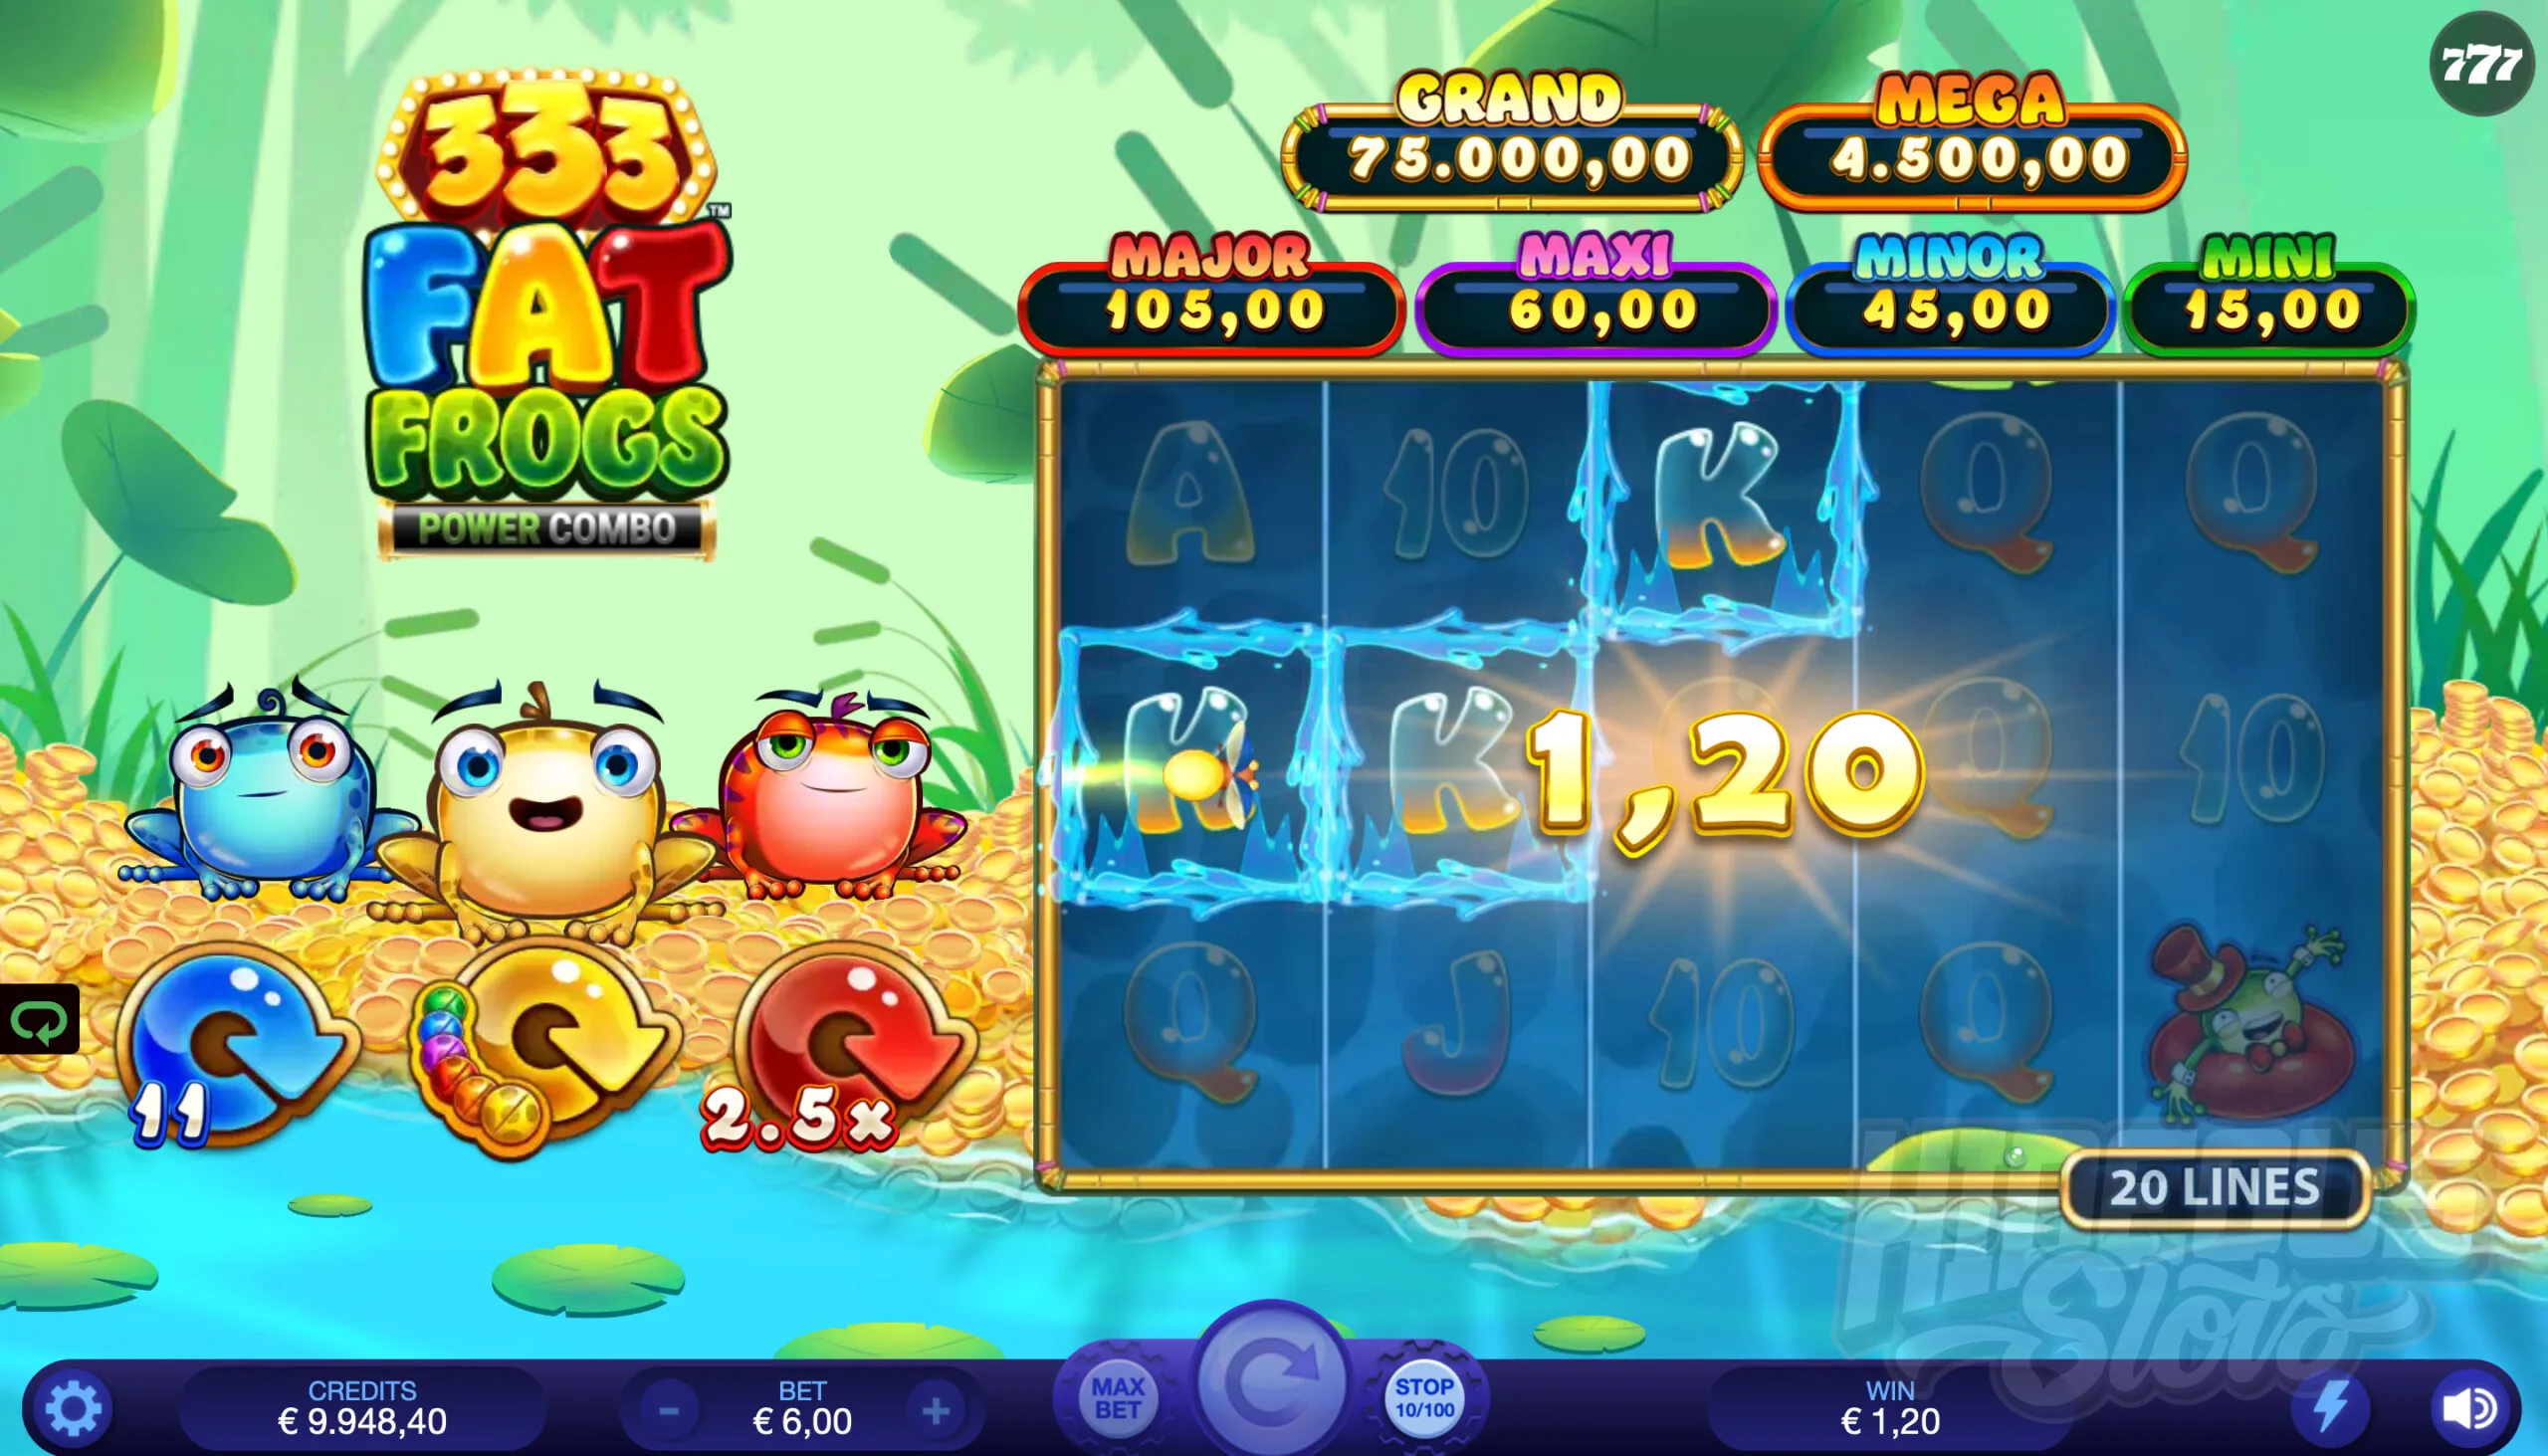 333 Fat Frogs Power Combo Offers Players 20 Fixed Win Lines